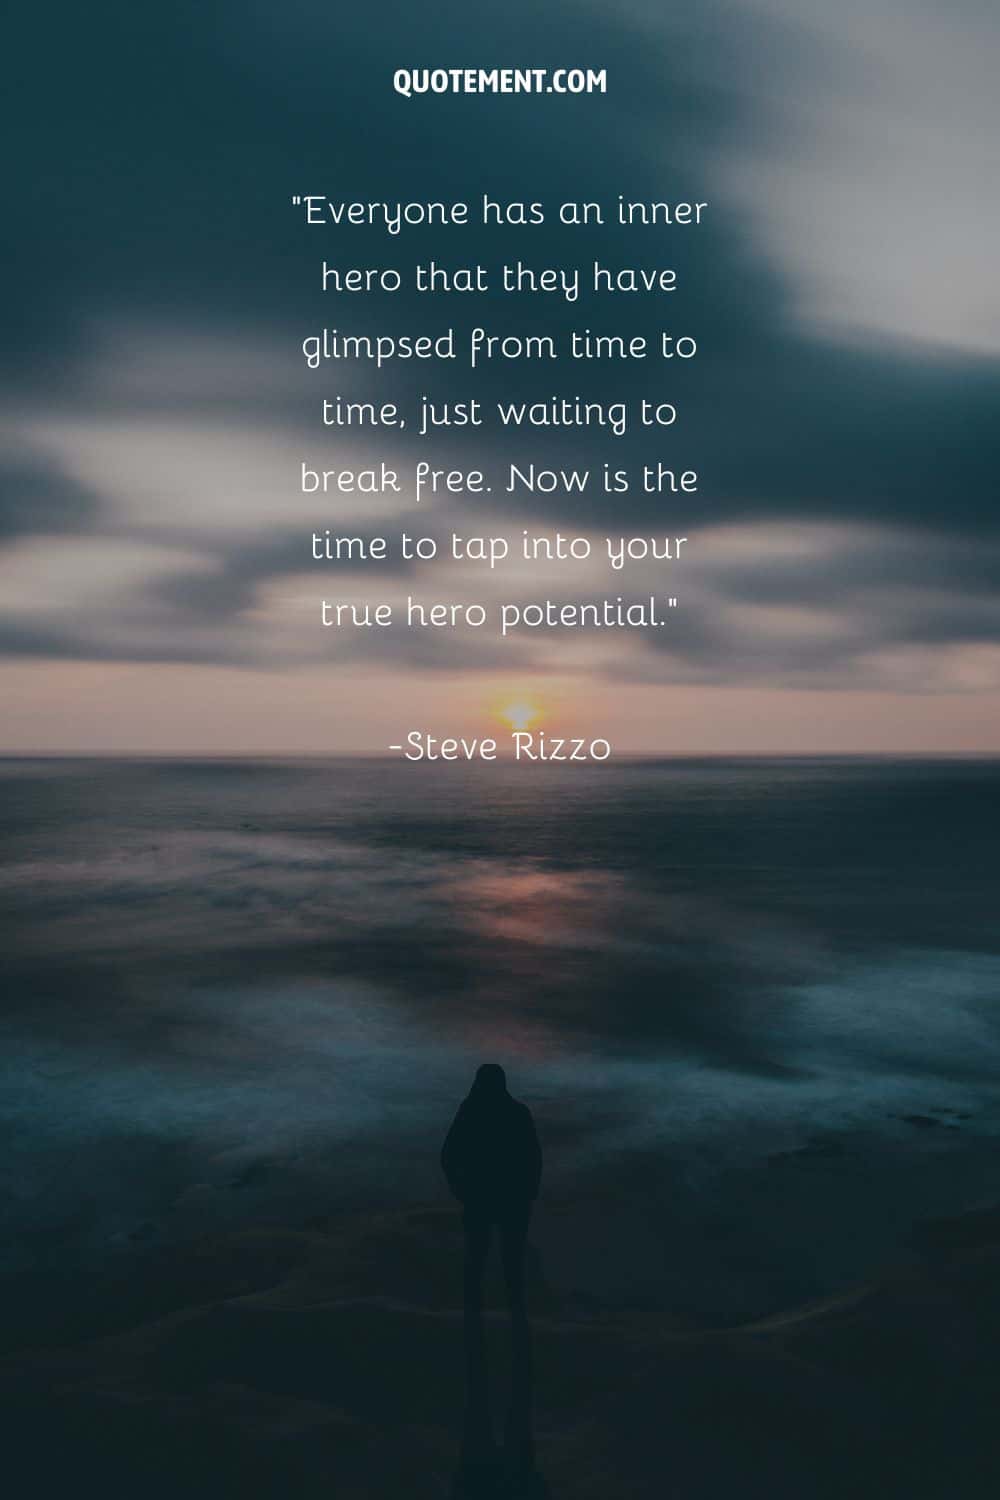 a man observing the sunset at the beach representing quote about an inner hero